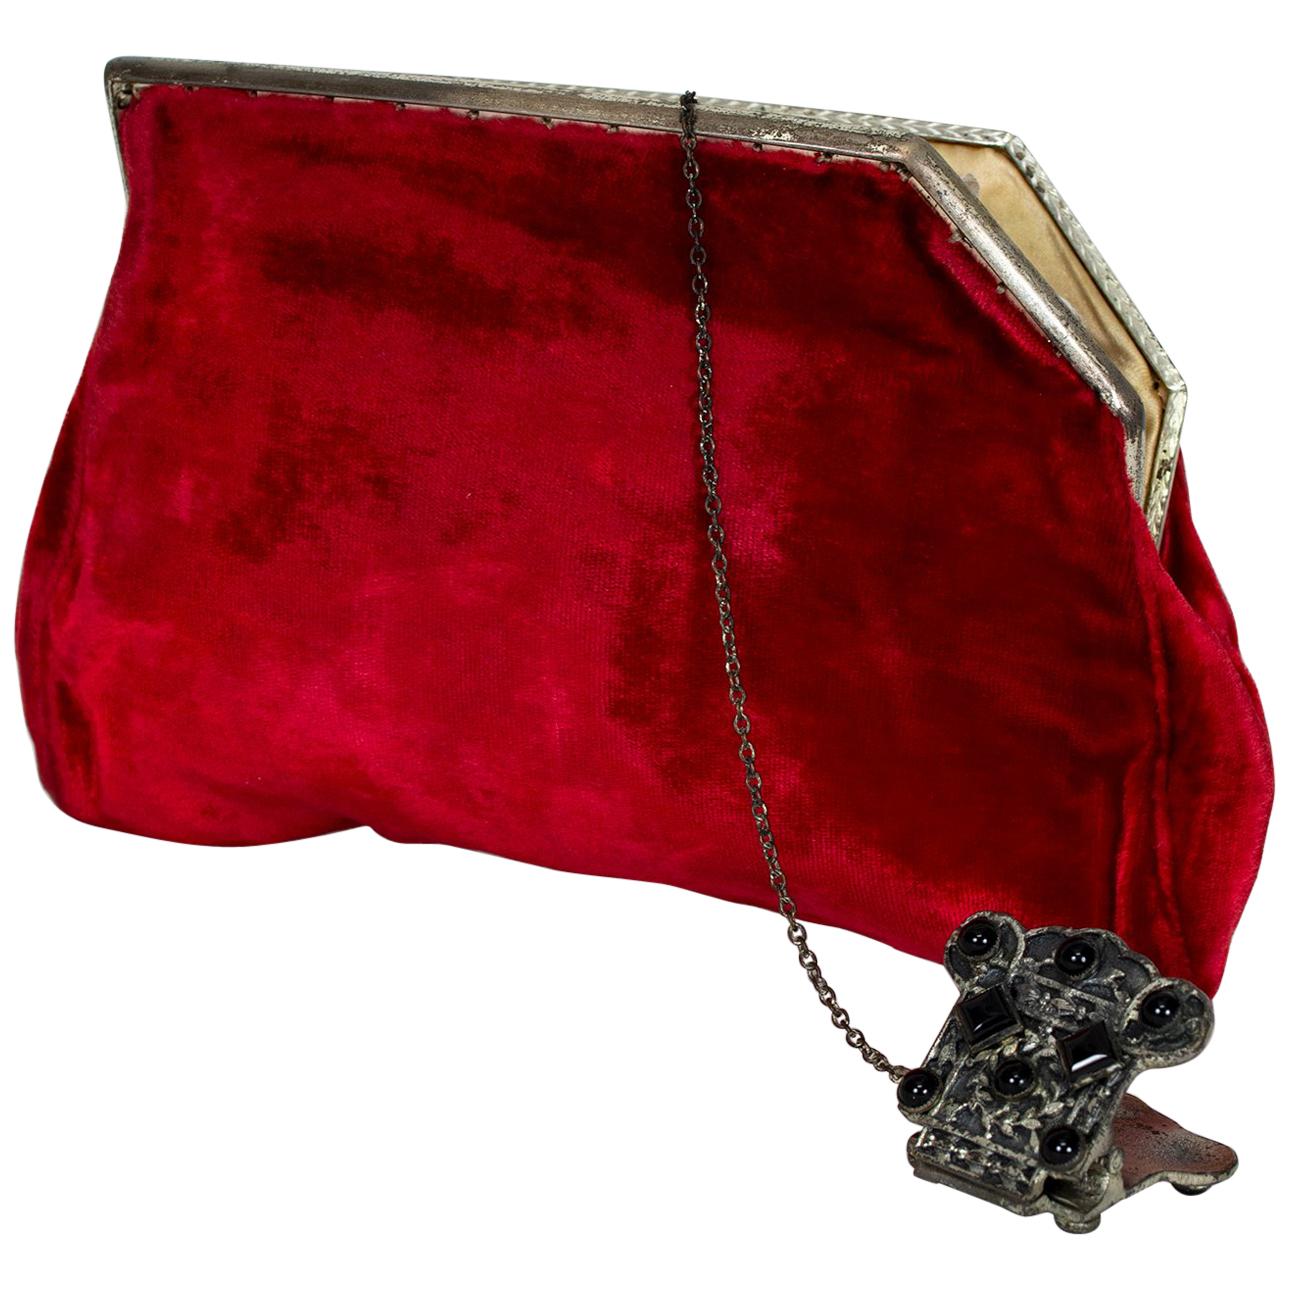 Red Velvet Evening Clutch with Onyx Closure and Chained Mirror, 1950s